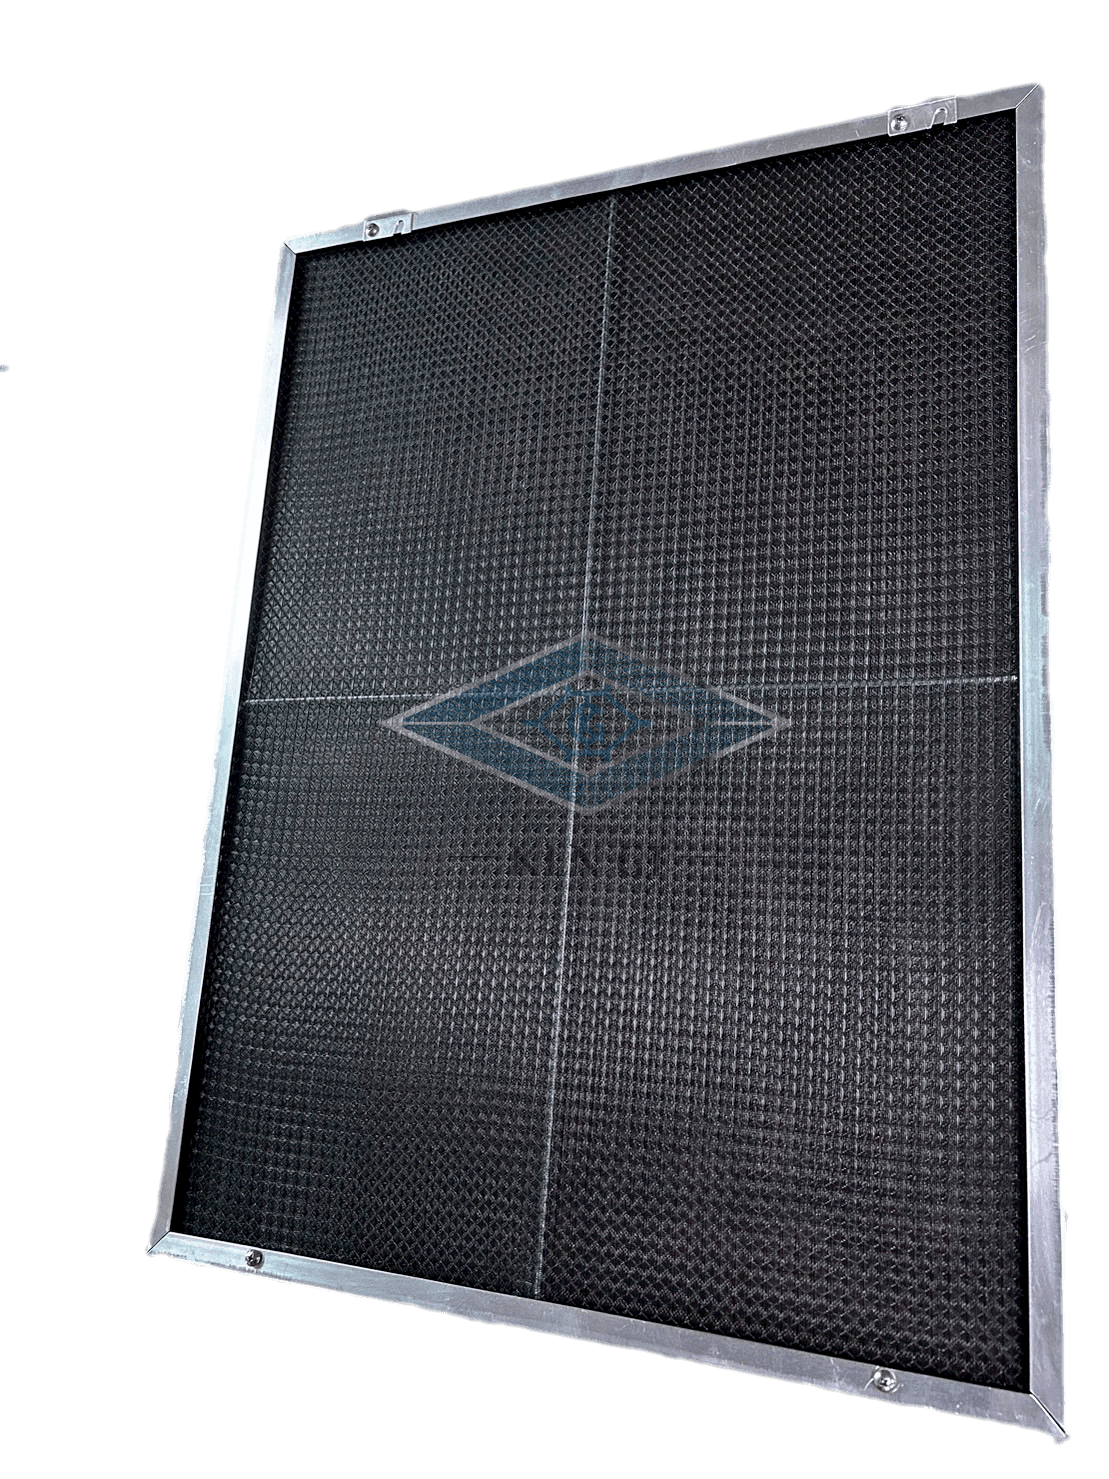 Metal frame + PE, PP filter screen can be customized according to specific application requirements